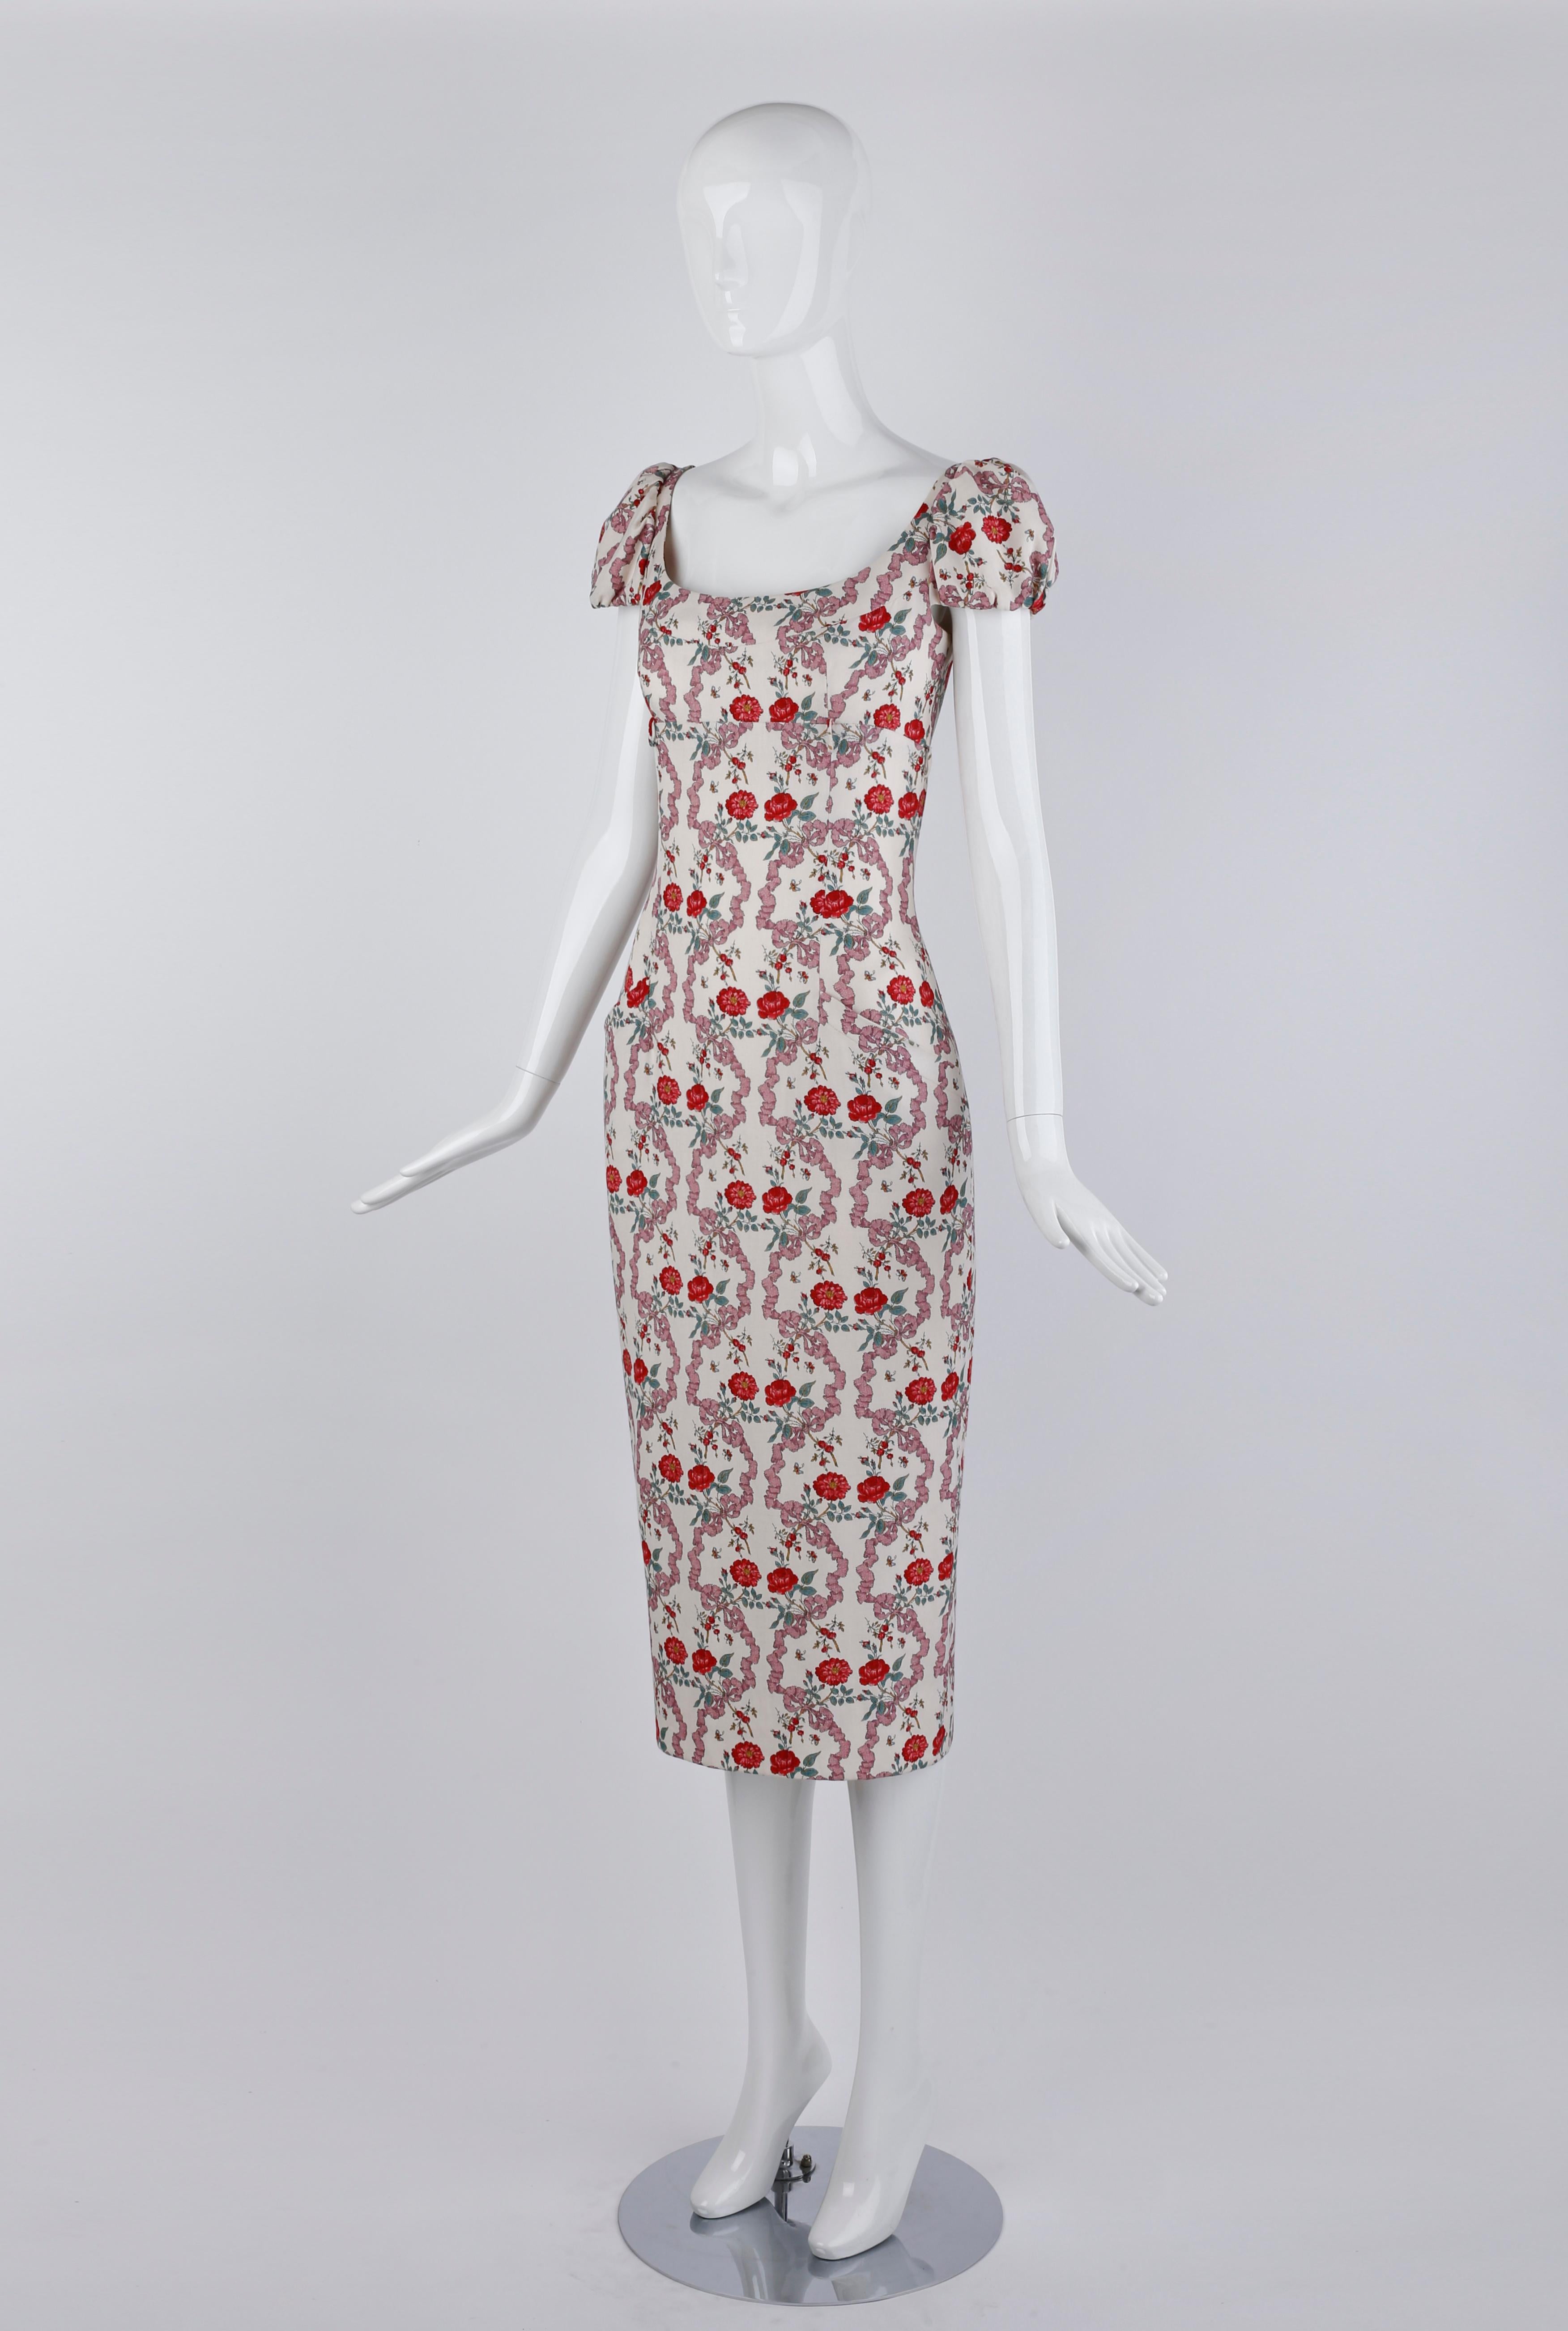 Givenchy Couture John Galliano S/S 1997 Bouquet Floral Ribbon Print Midi Dress In Good Condition For Sale In Chicago, IL